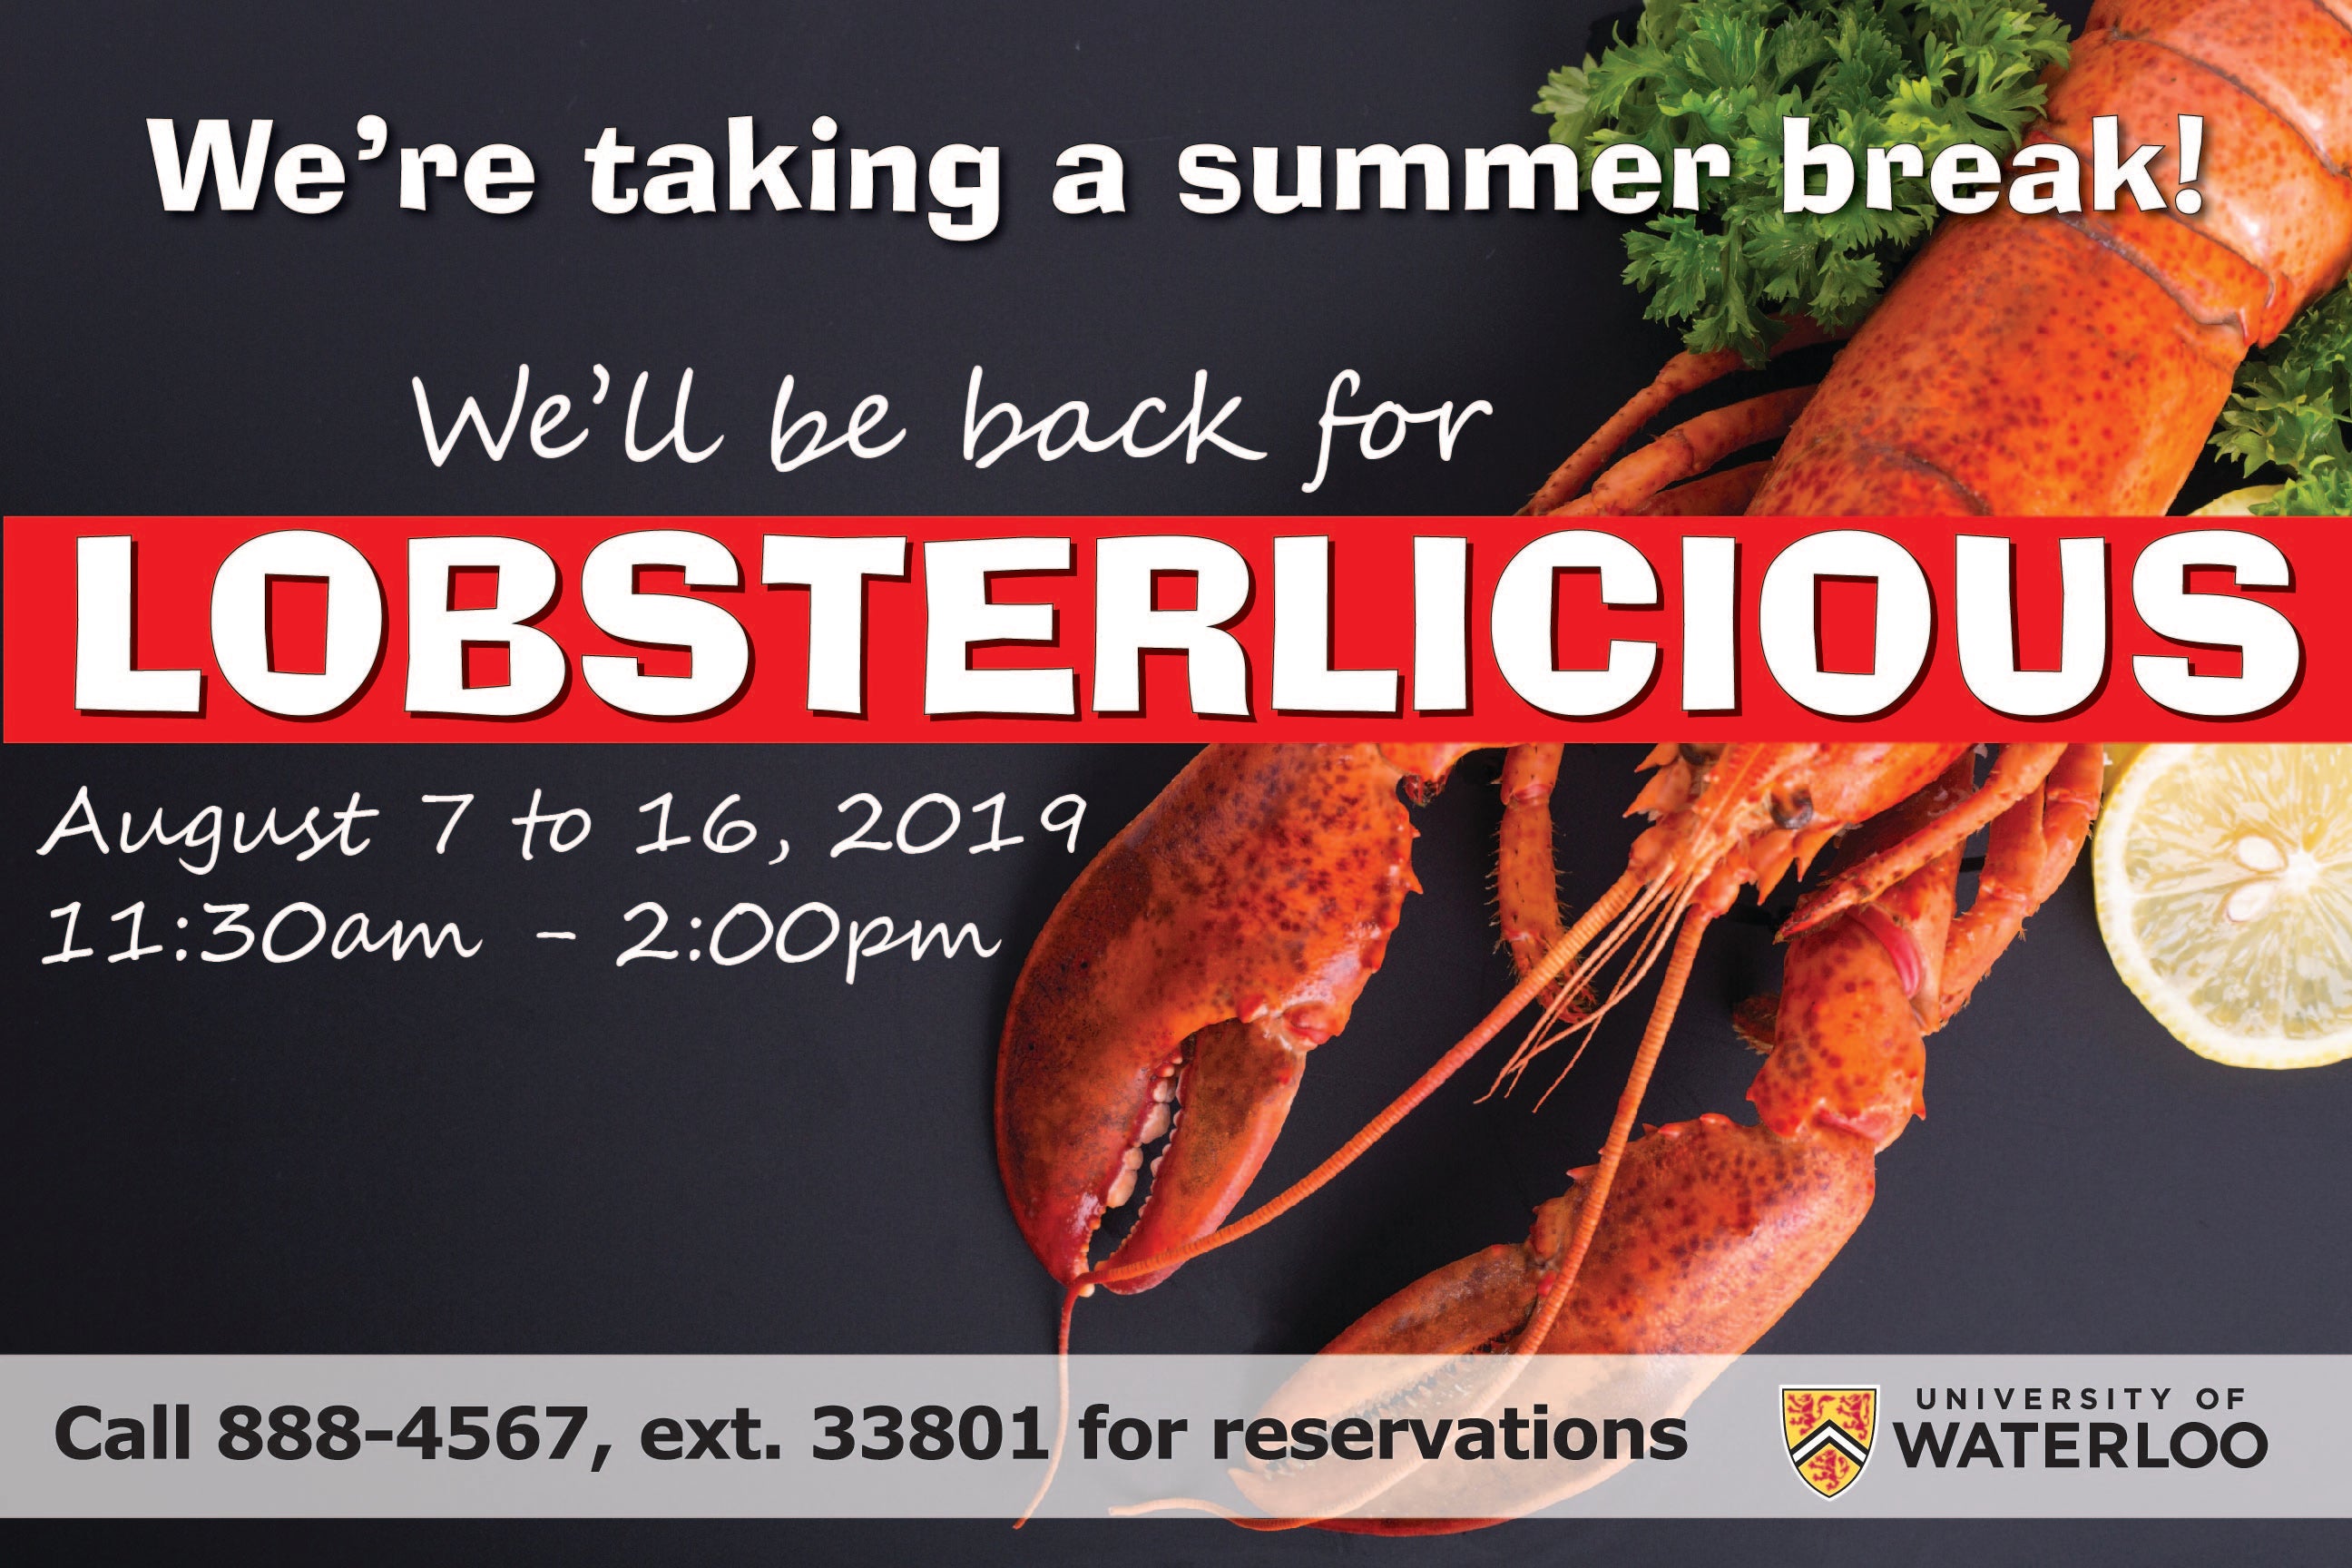 join us for lobsterlicious August 7 to 16